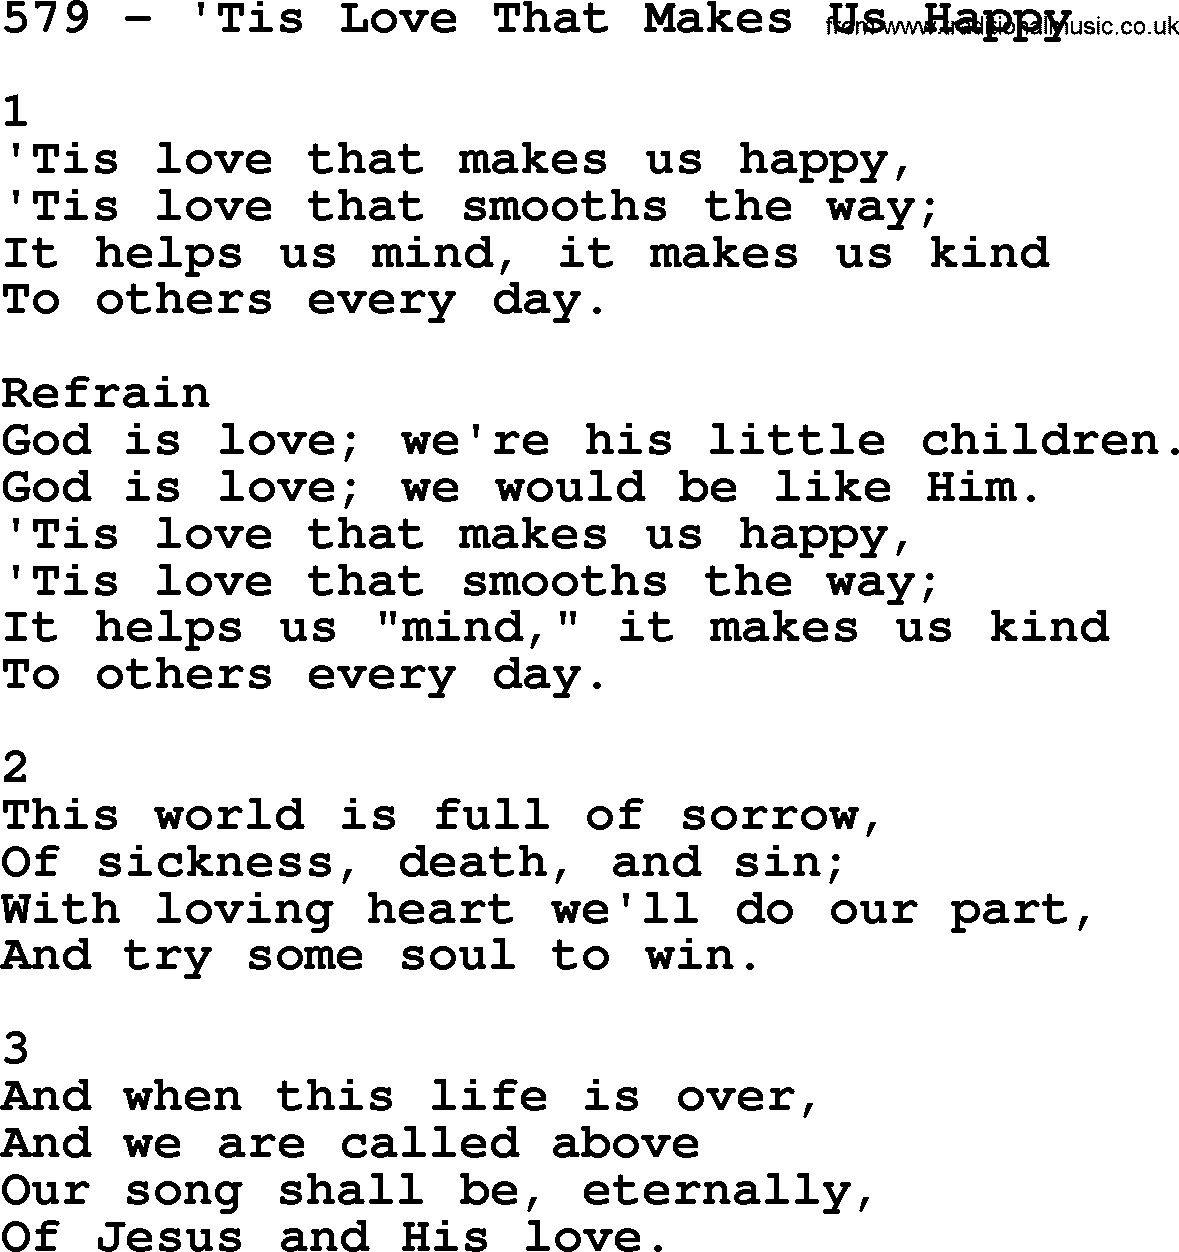 Complete Adventis Hymnal, title: 579-'Tis Love That Makes Us Happy, with lyrics, midi, mp3, powerpoints(PPT) and PDF,